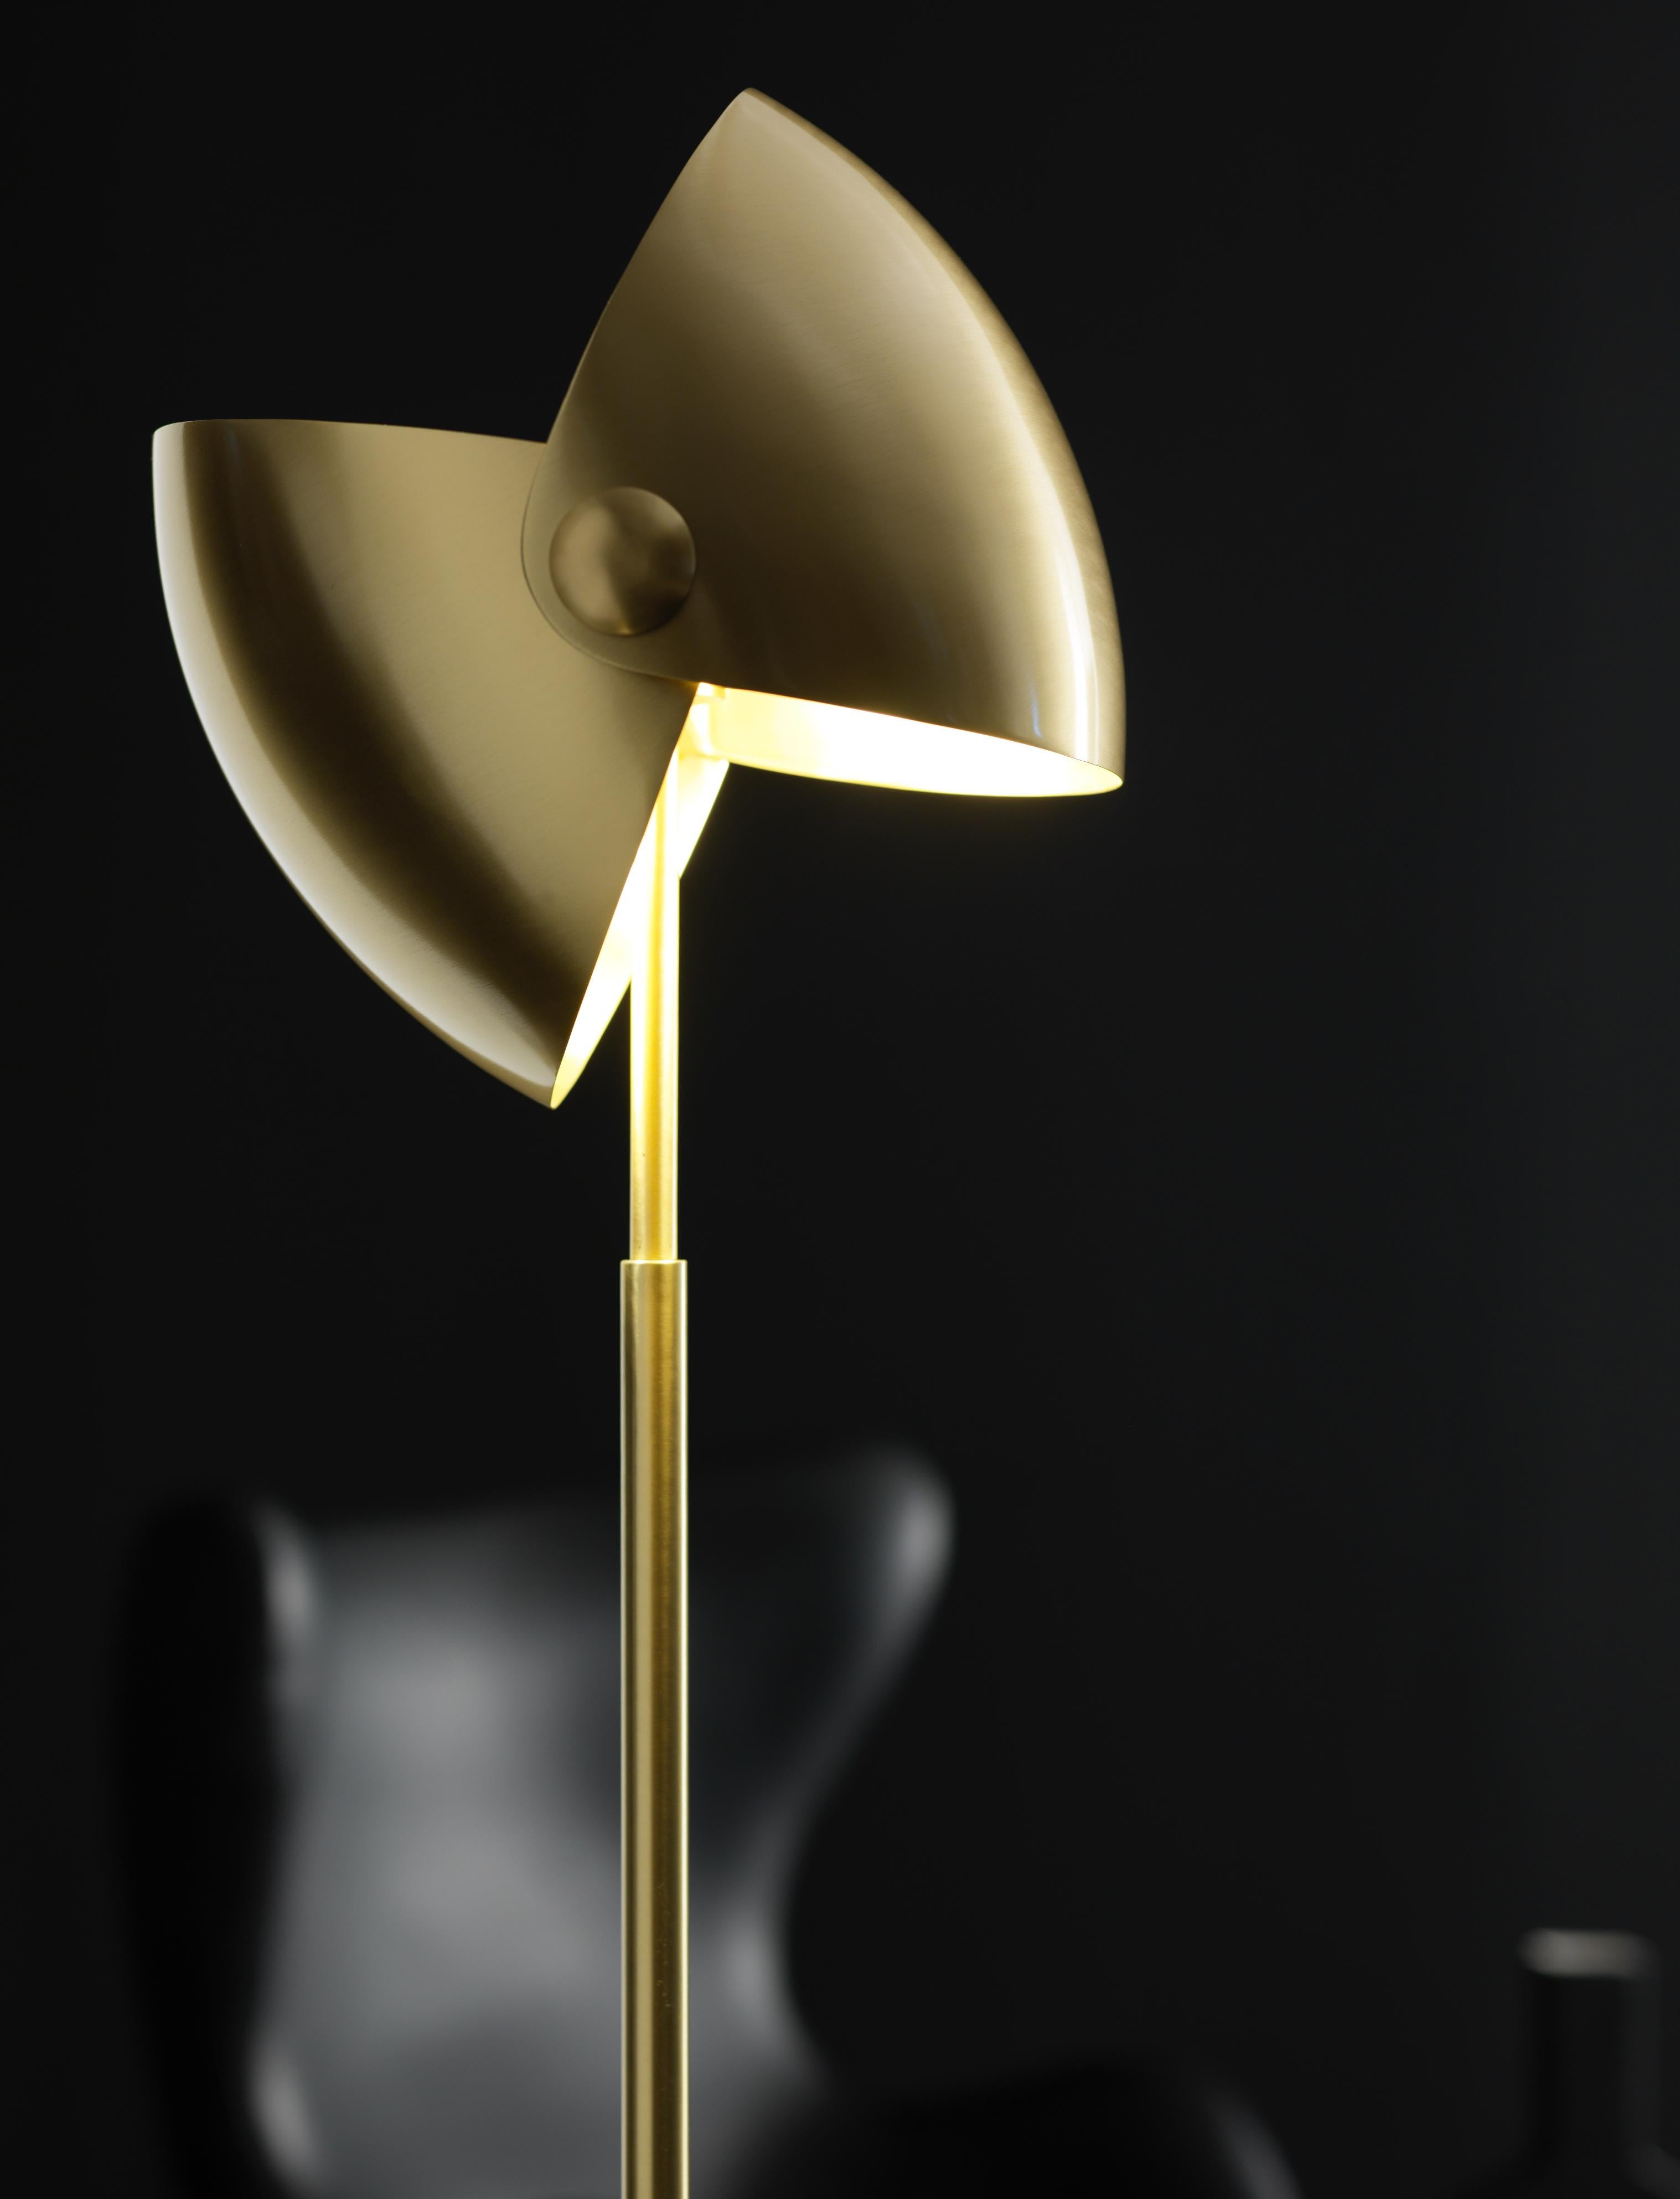 Eirene brass Italian floor lamp by Esperia.
Eirene, lamp made entirely of brass. It is adjustable to obtain various configurations. Available in suspension, floor and wall version.
Measures: suspension and floor version diameter 32 cm.
height: 150